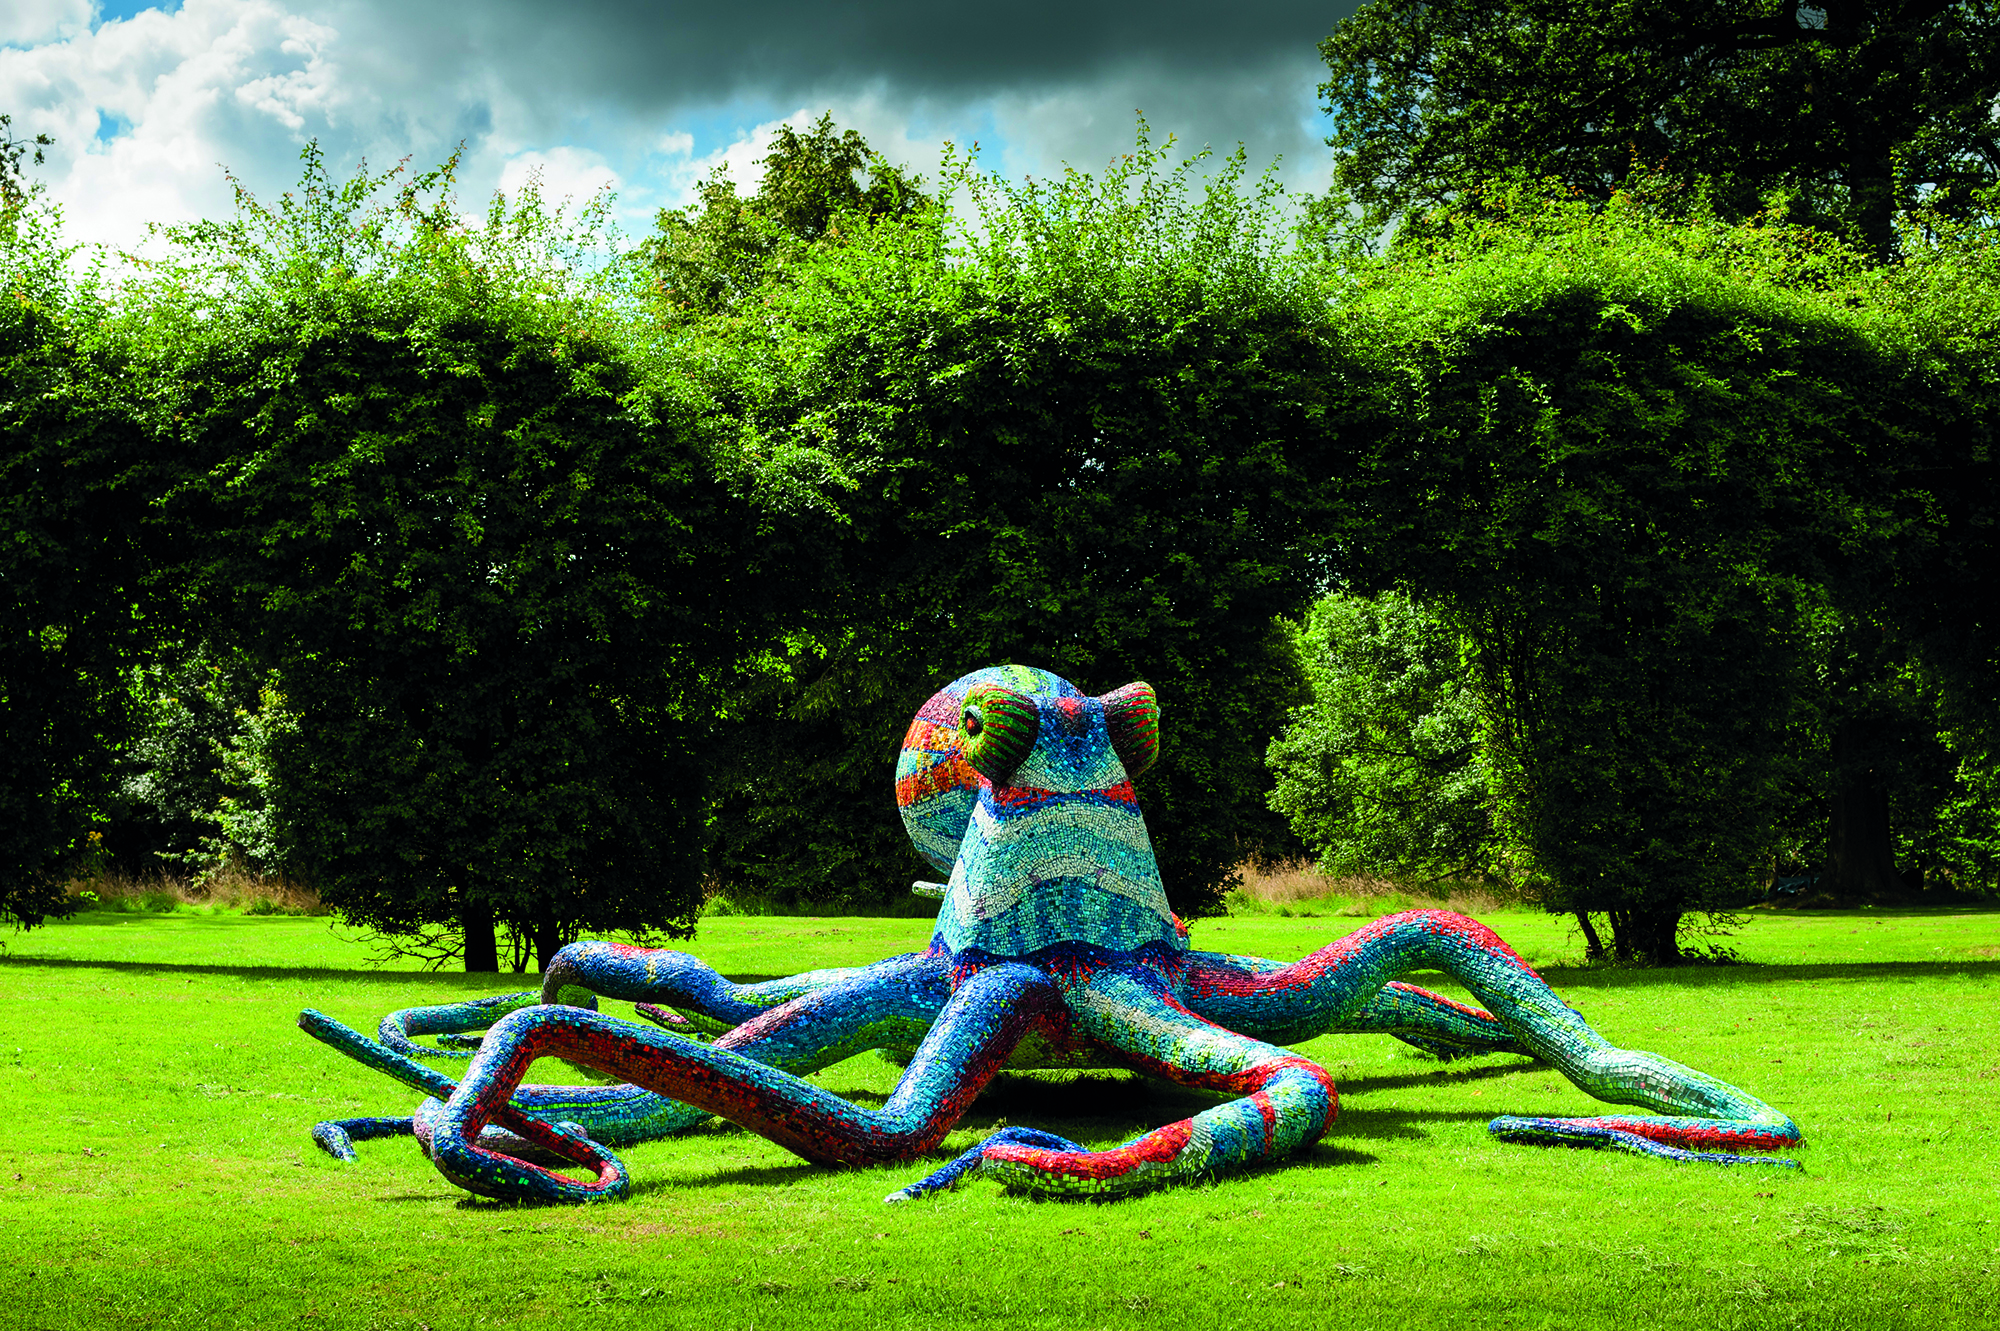 Marialuisa Tadei, Octopus 2011. Courtesy the artist and YSP at Yorkshire Sculpture Park